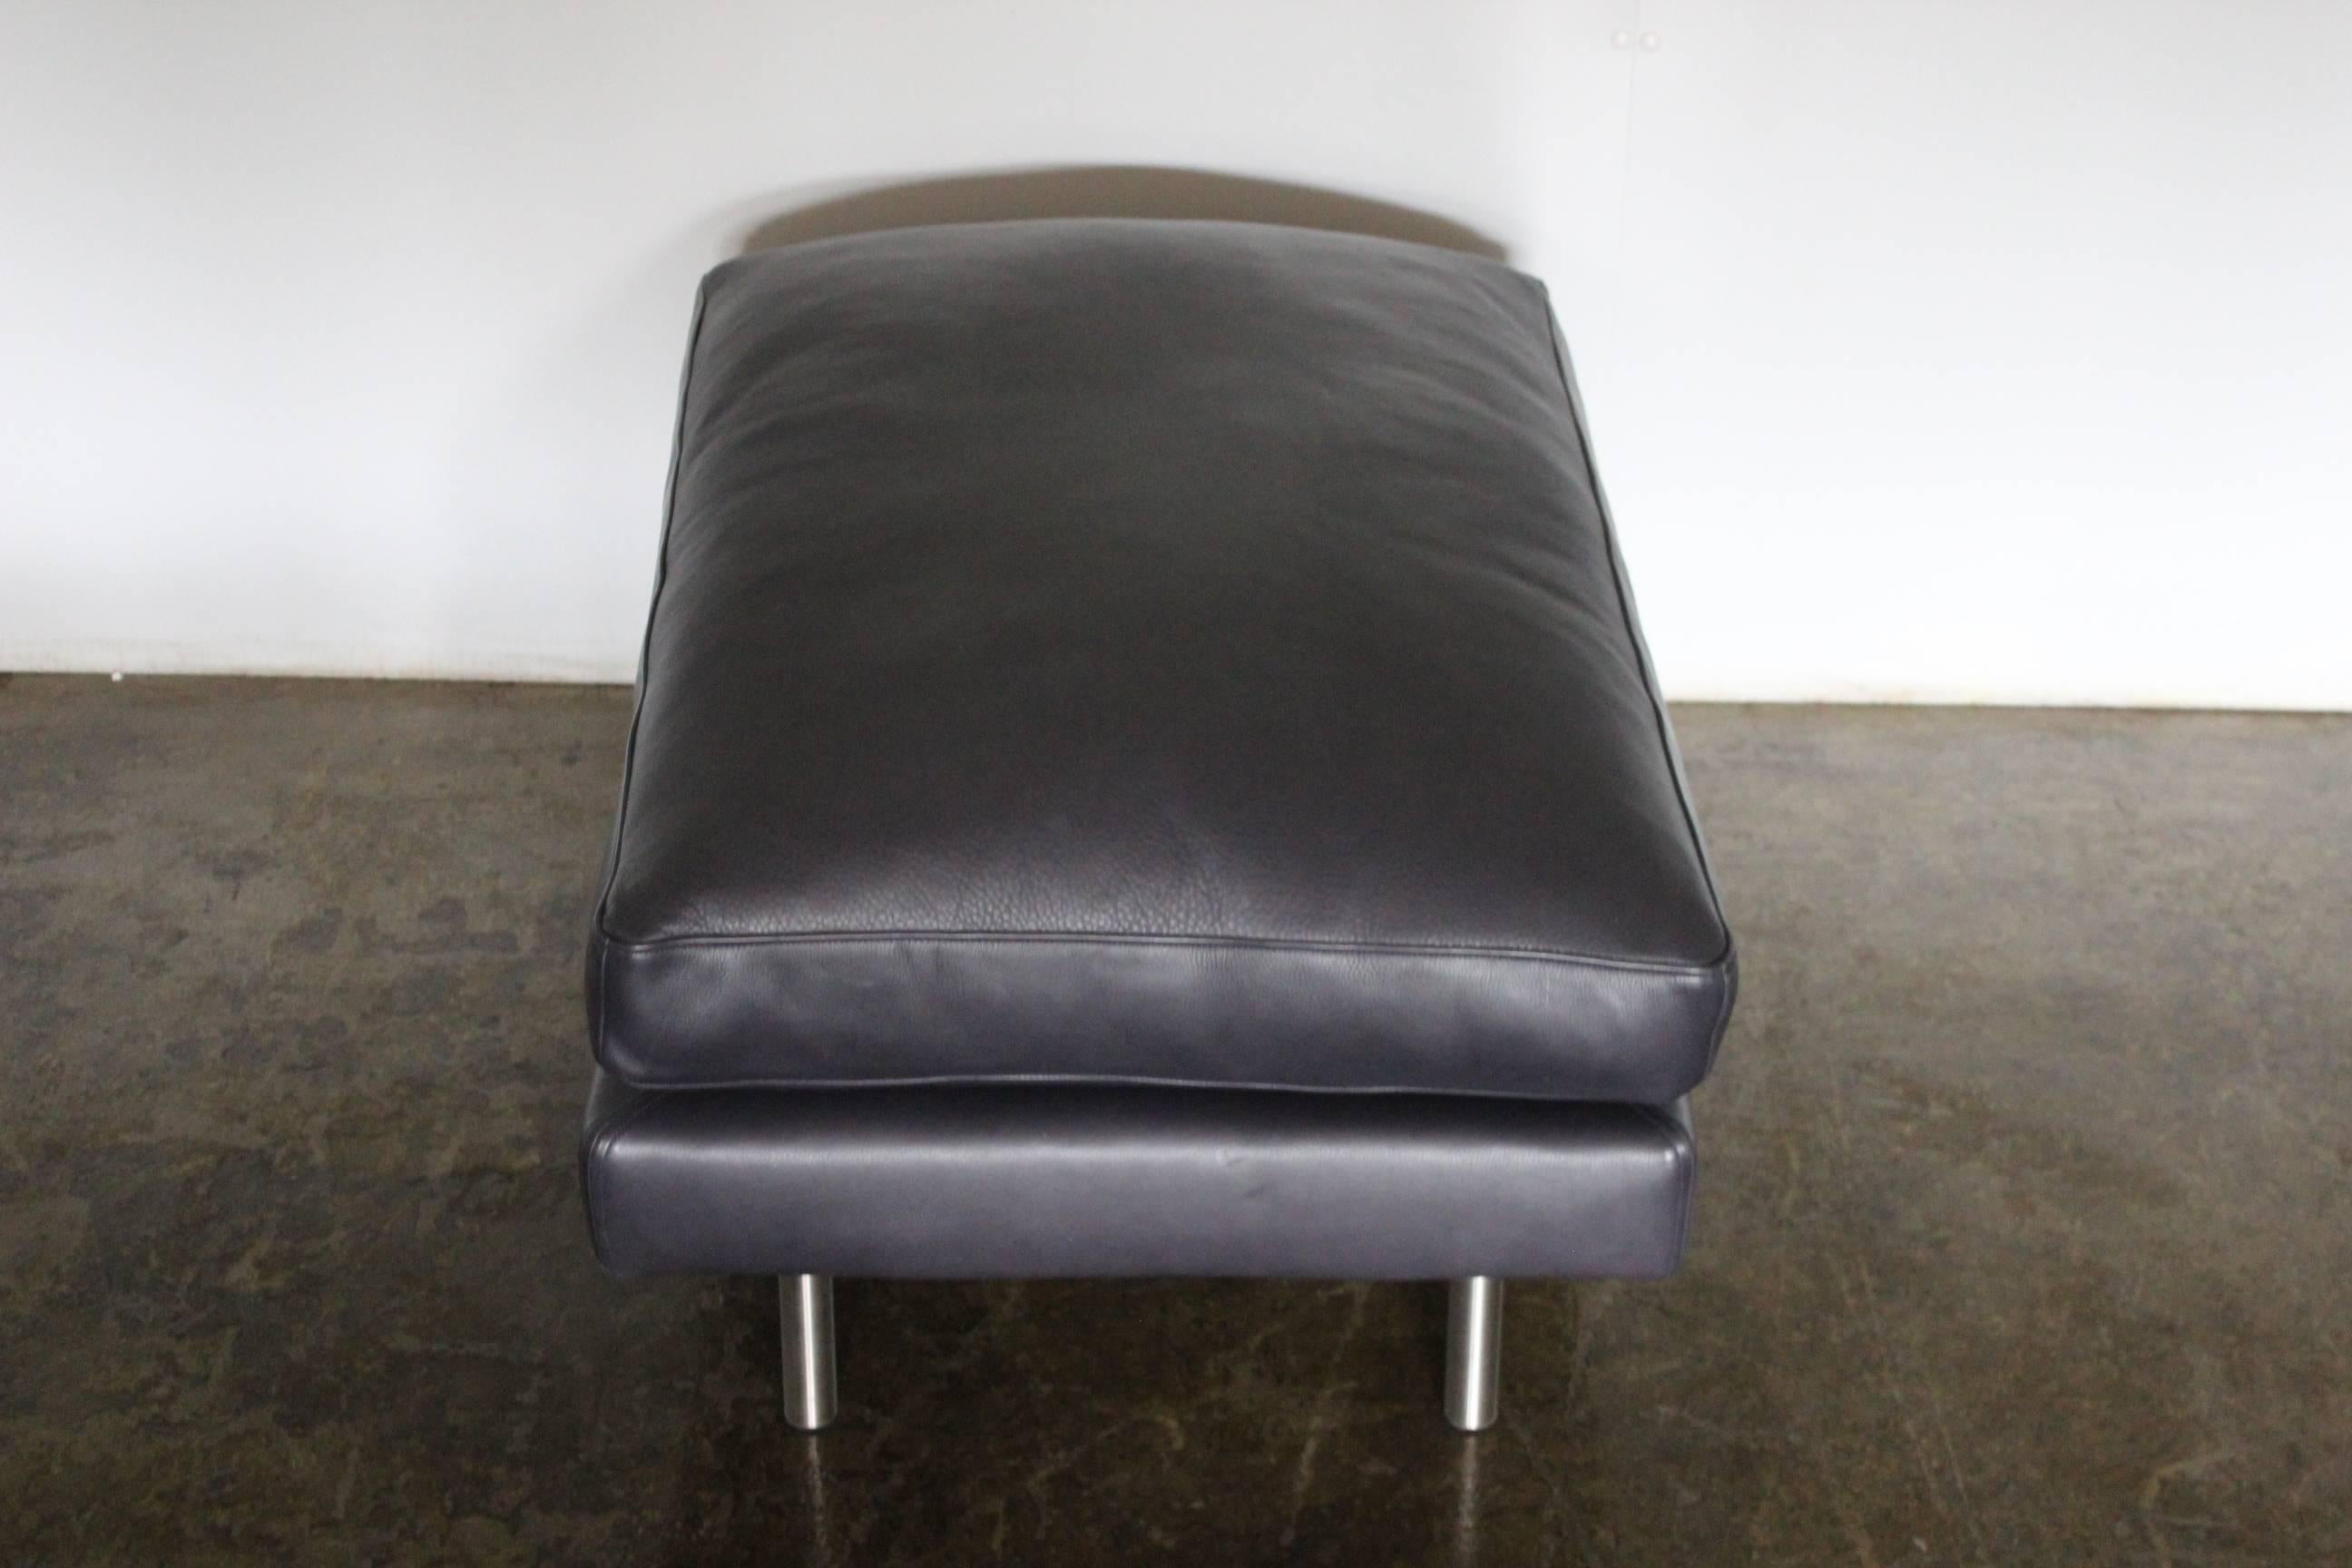 British SCP “Woodgate” Six-Seat L-Shape Sofa, Armchair and Ottoman Suite in Navy Leather